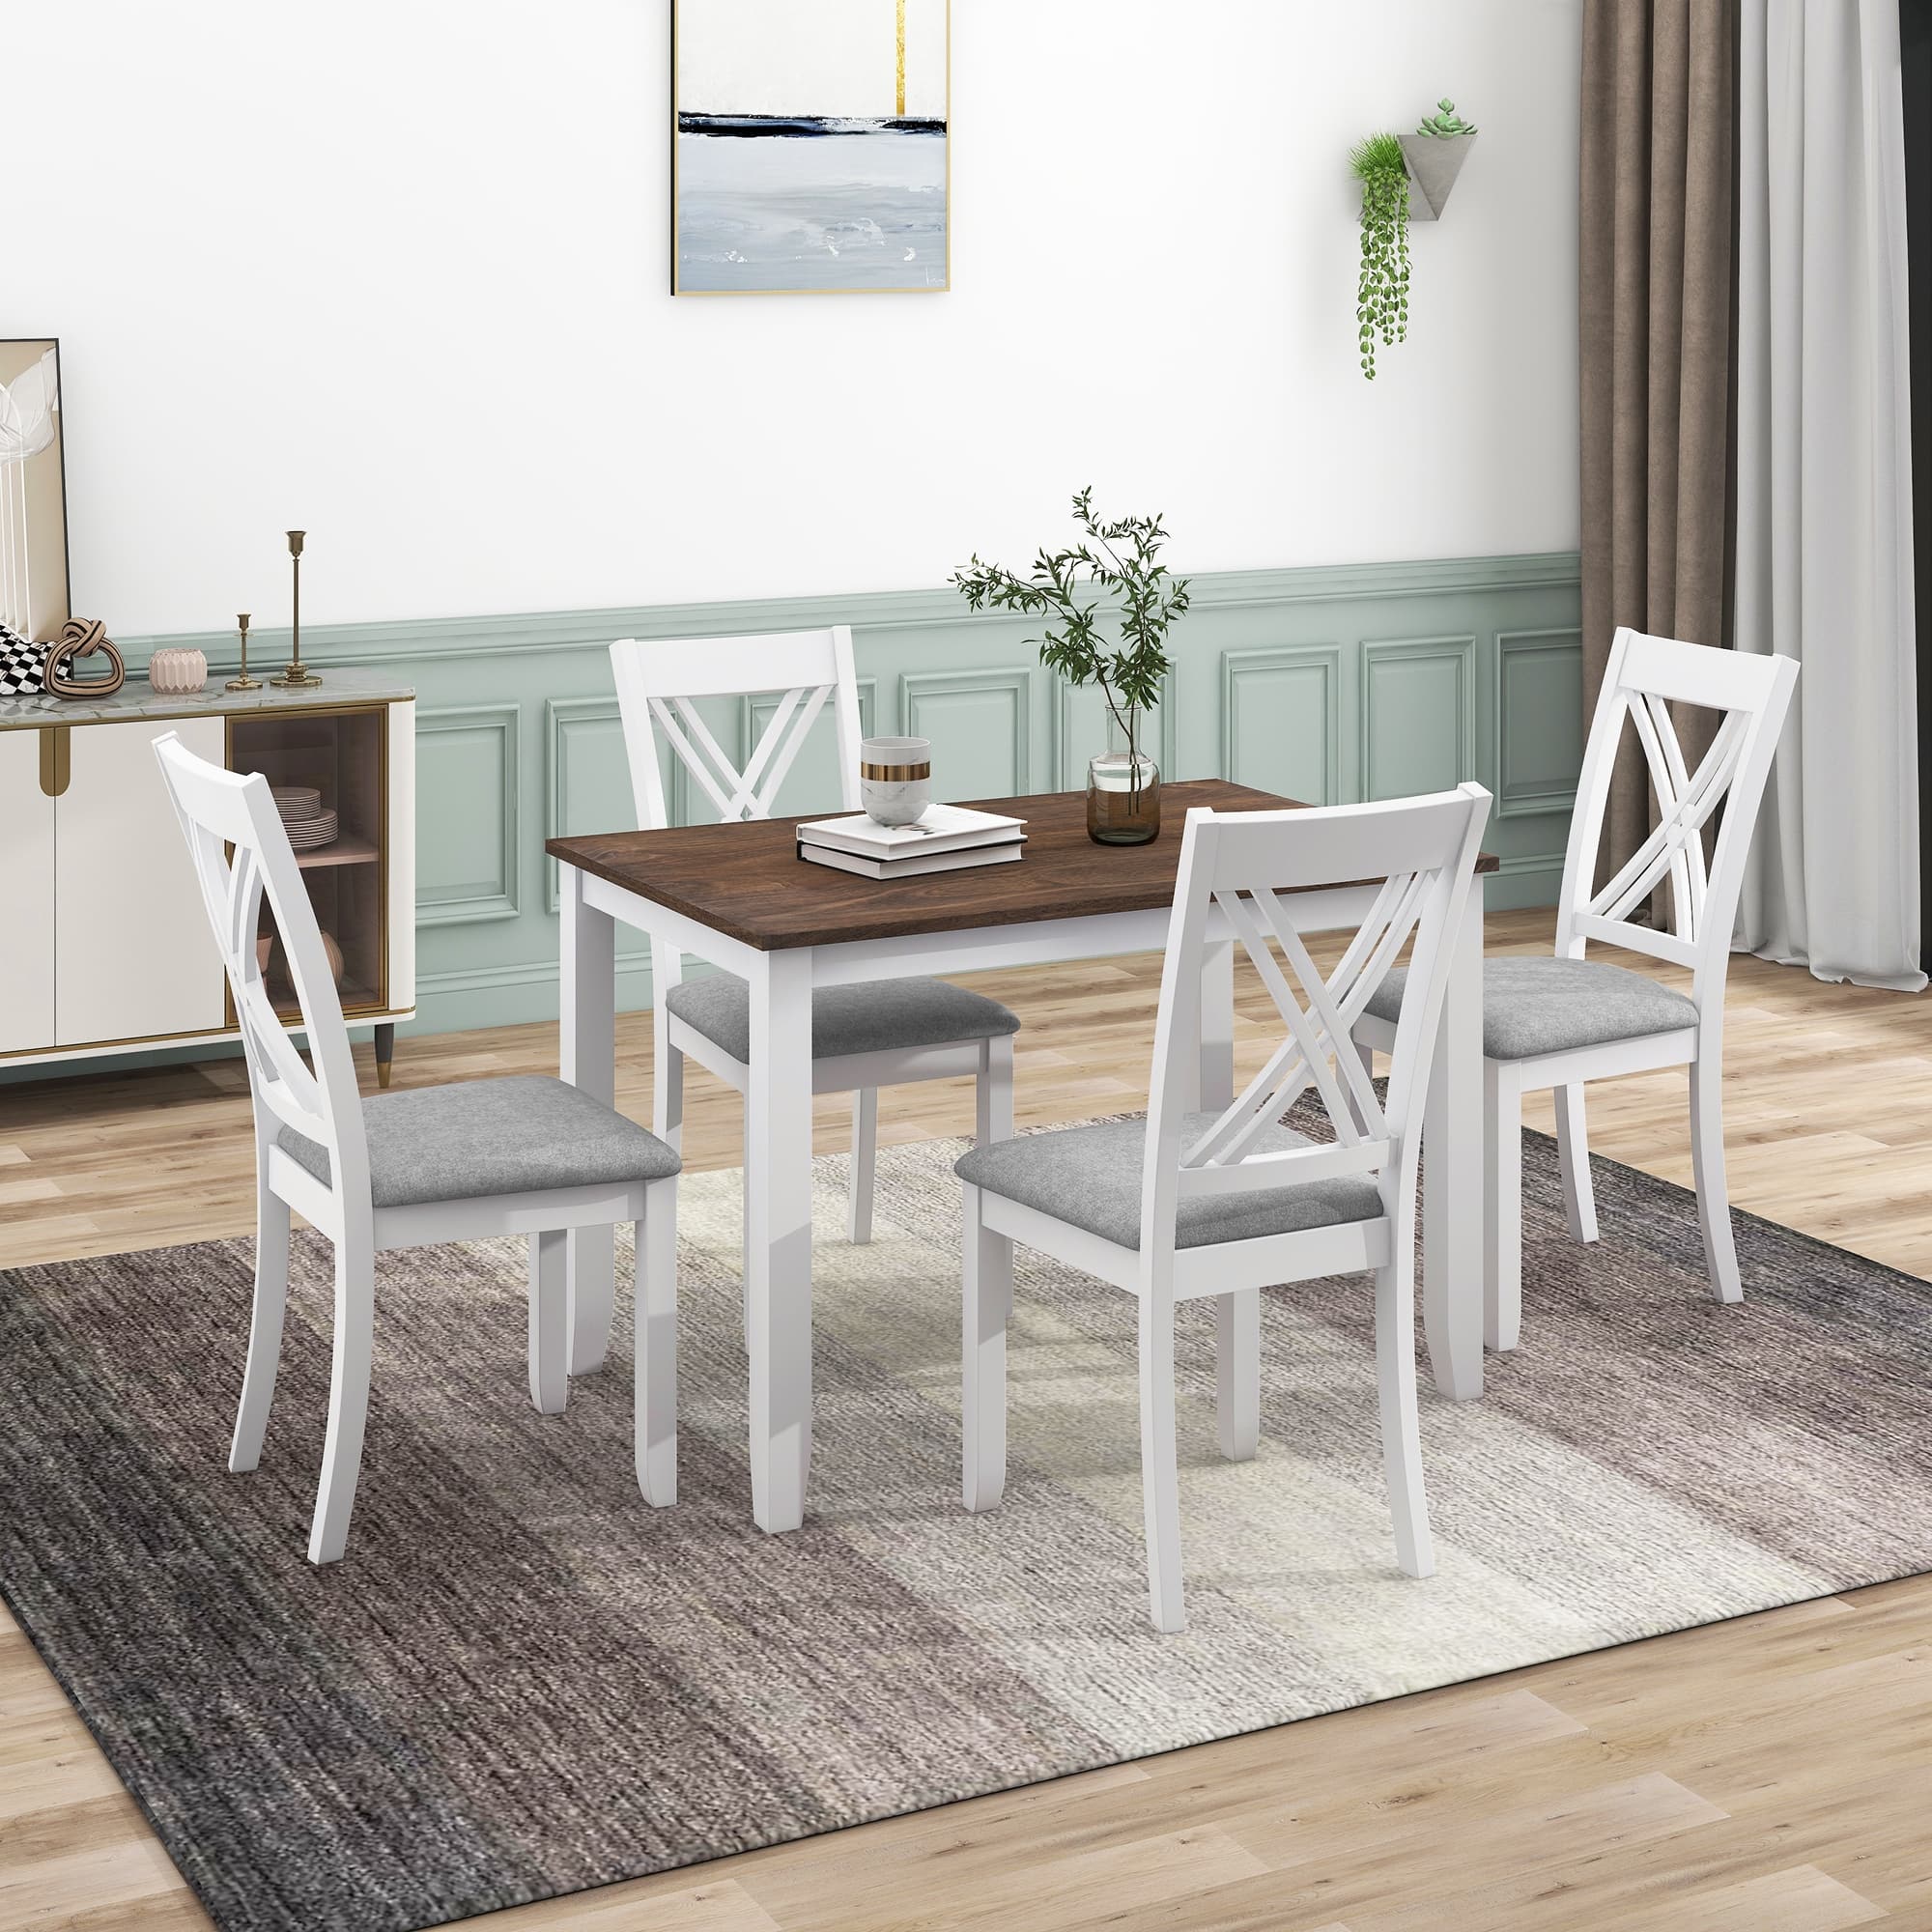 White Rustic Minimalist Wood 5-Piece Dining Table Set with 4 X-Back ...